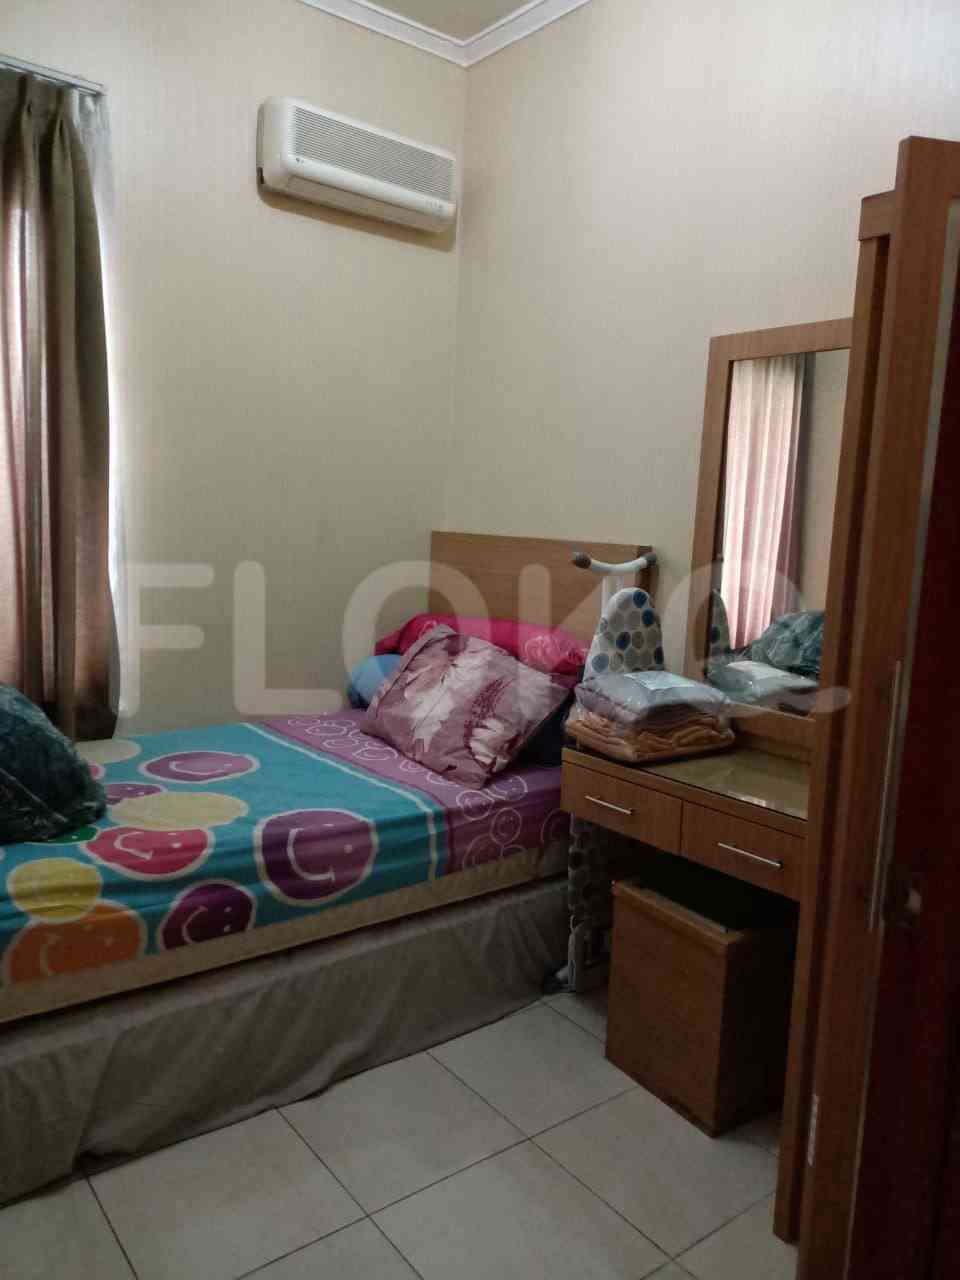 2 Bedroom on 7th Floor for Rent in Sudirman Park Apartment - ftad1f 3